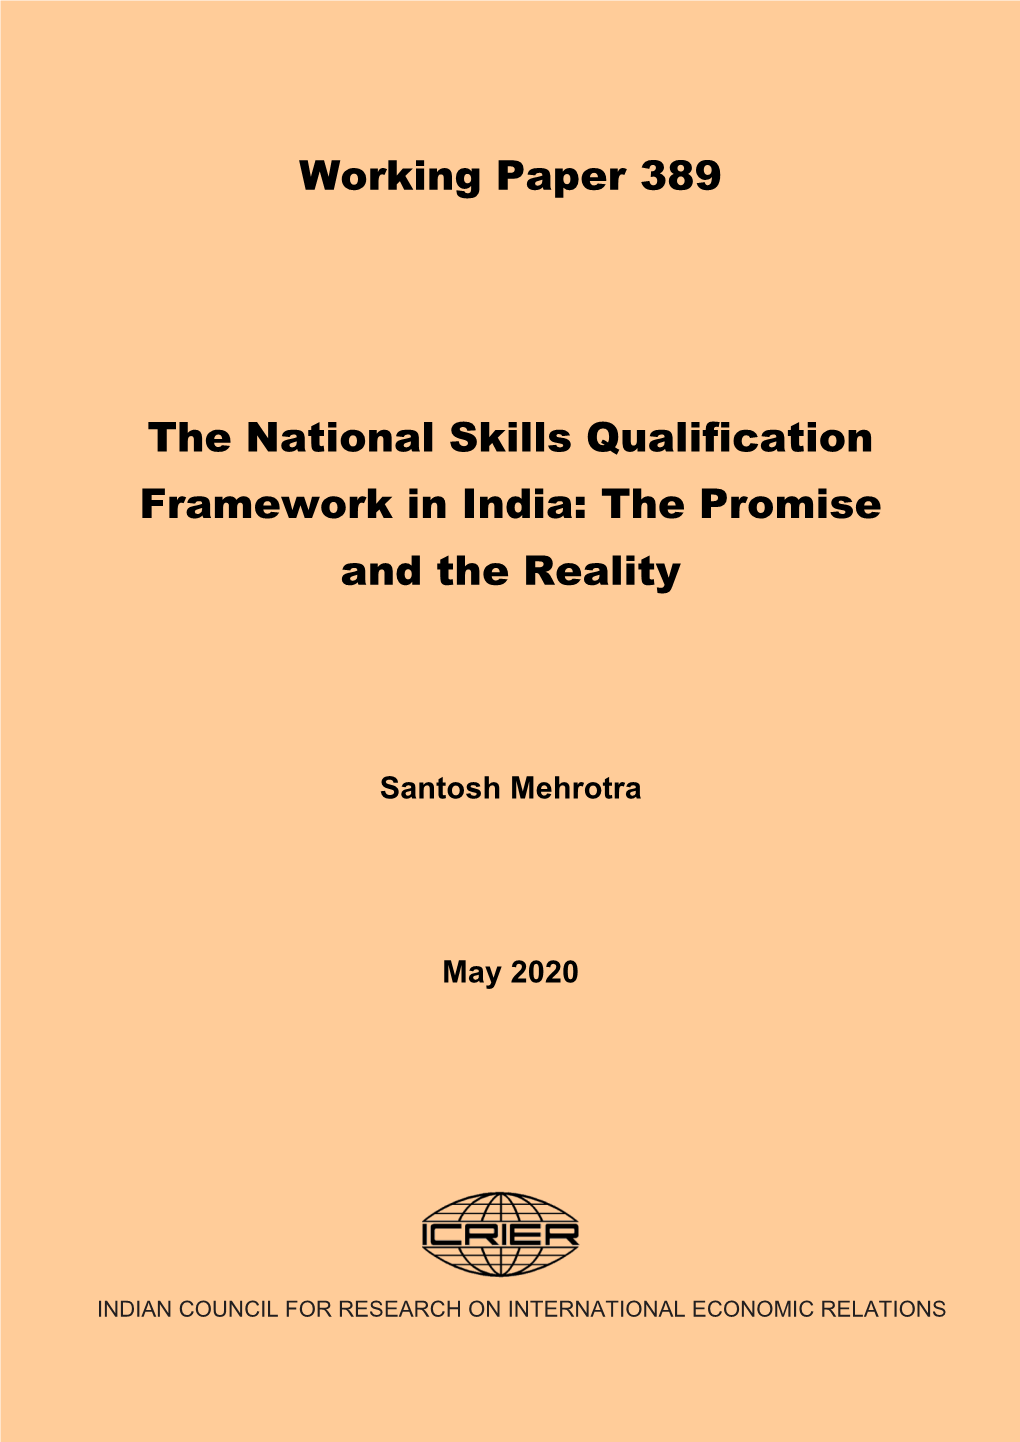 Working Paper 389 the National Skills Qualification Framework in India: the Promise and the Reality